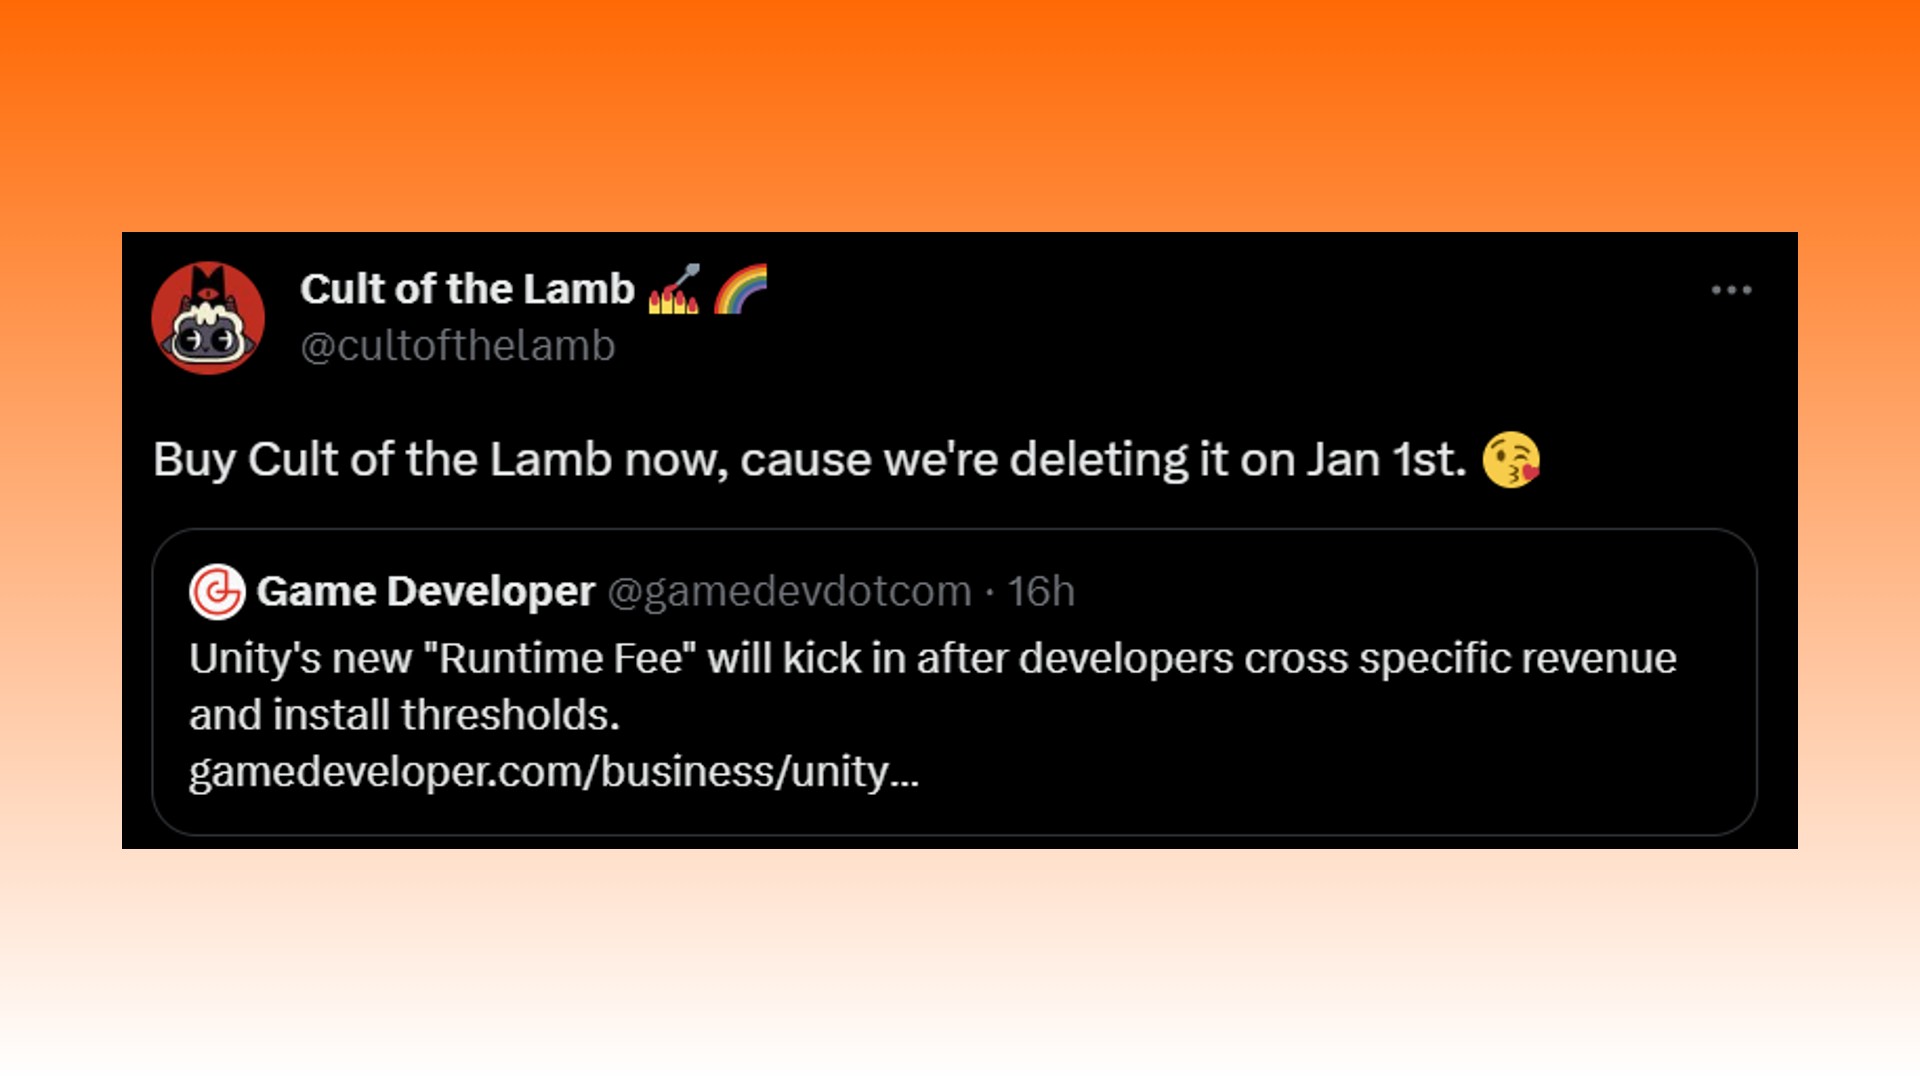 Cult of the Lamb deleted: A statement from Massive Monster, creator of roguelike Cult of the Lamb